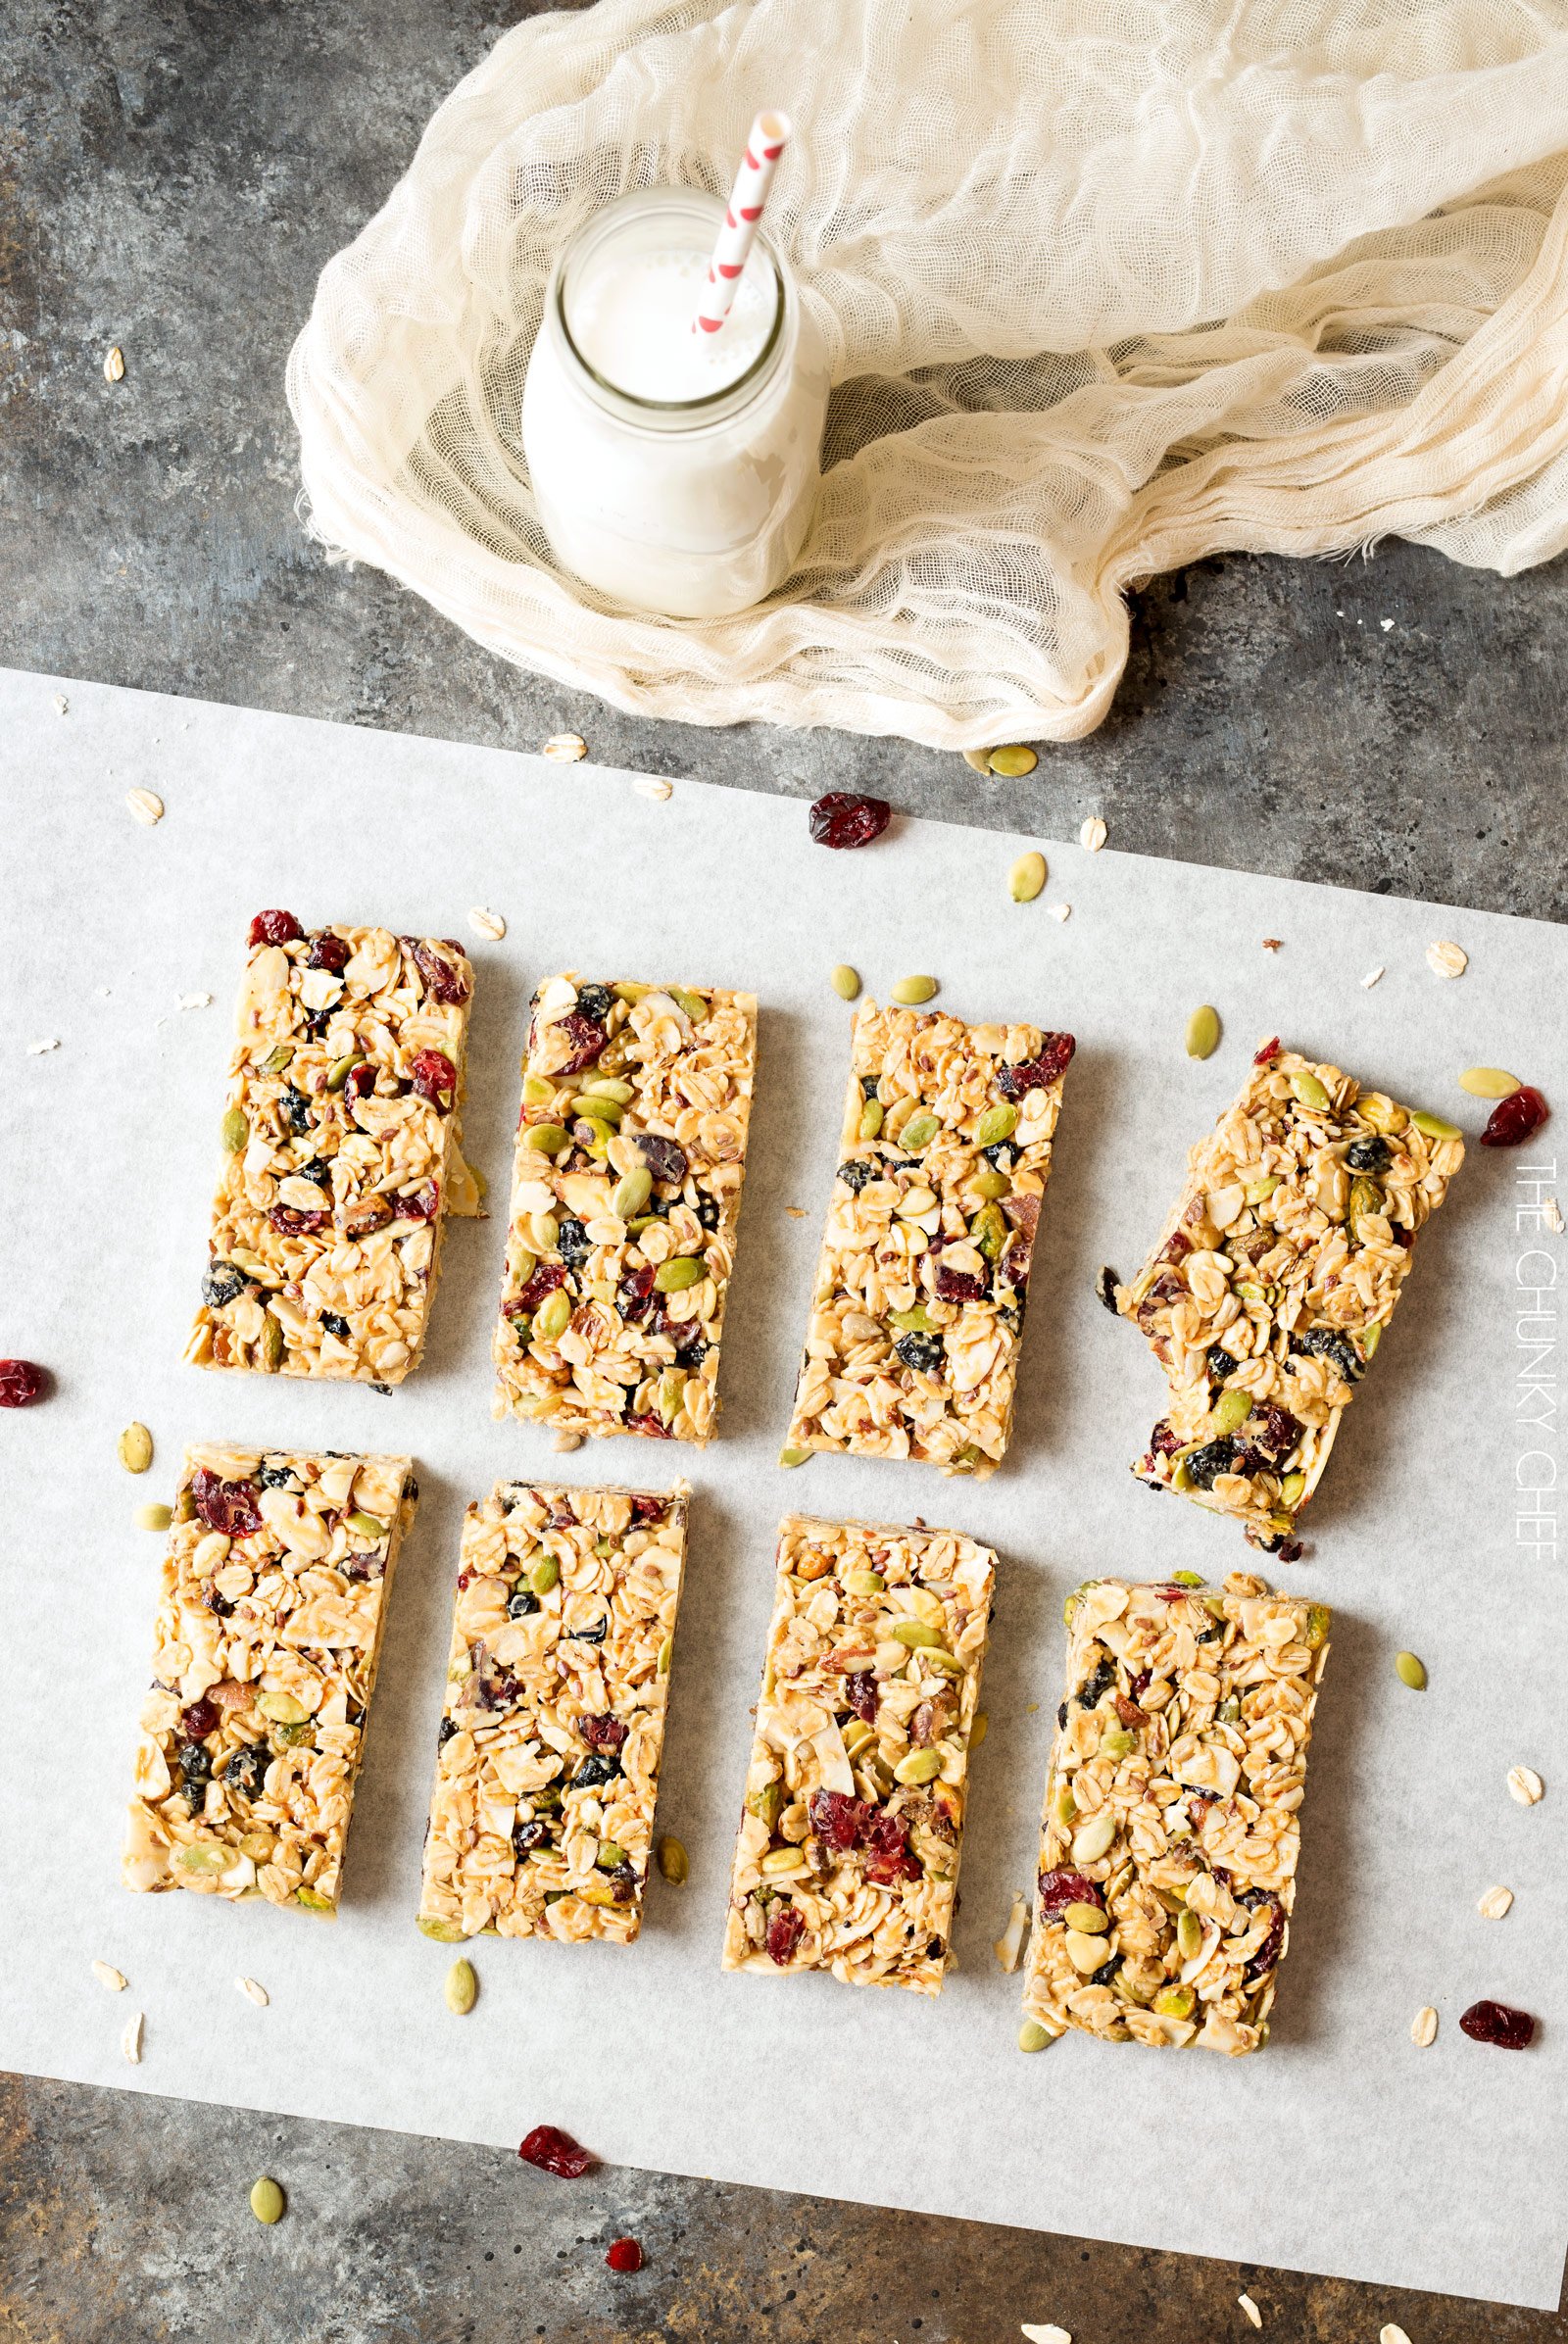 No Bake Chewy Trail Mix Granola Bars | These chewy trail mix granola bars are incredibly easy, no bake, and are naturally sweetened. Make yourself a snack you can feel great about! | http://thechunkychef.com